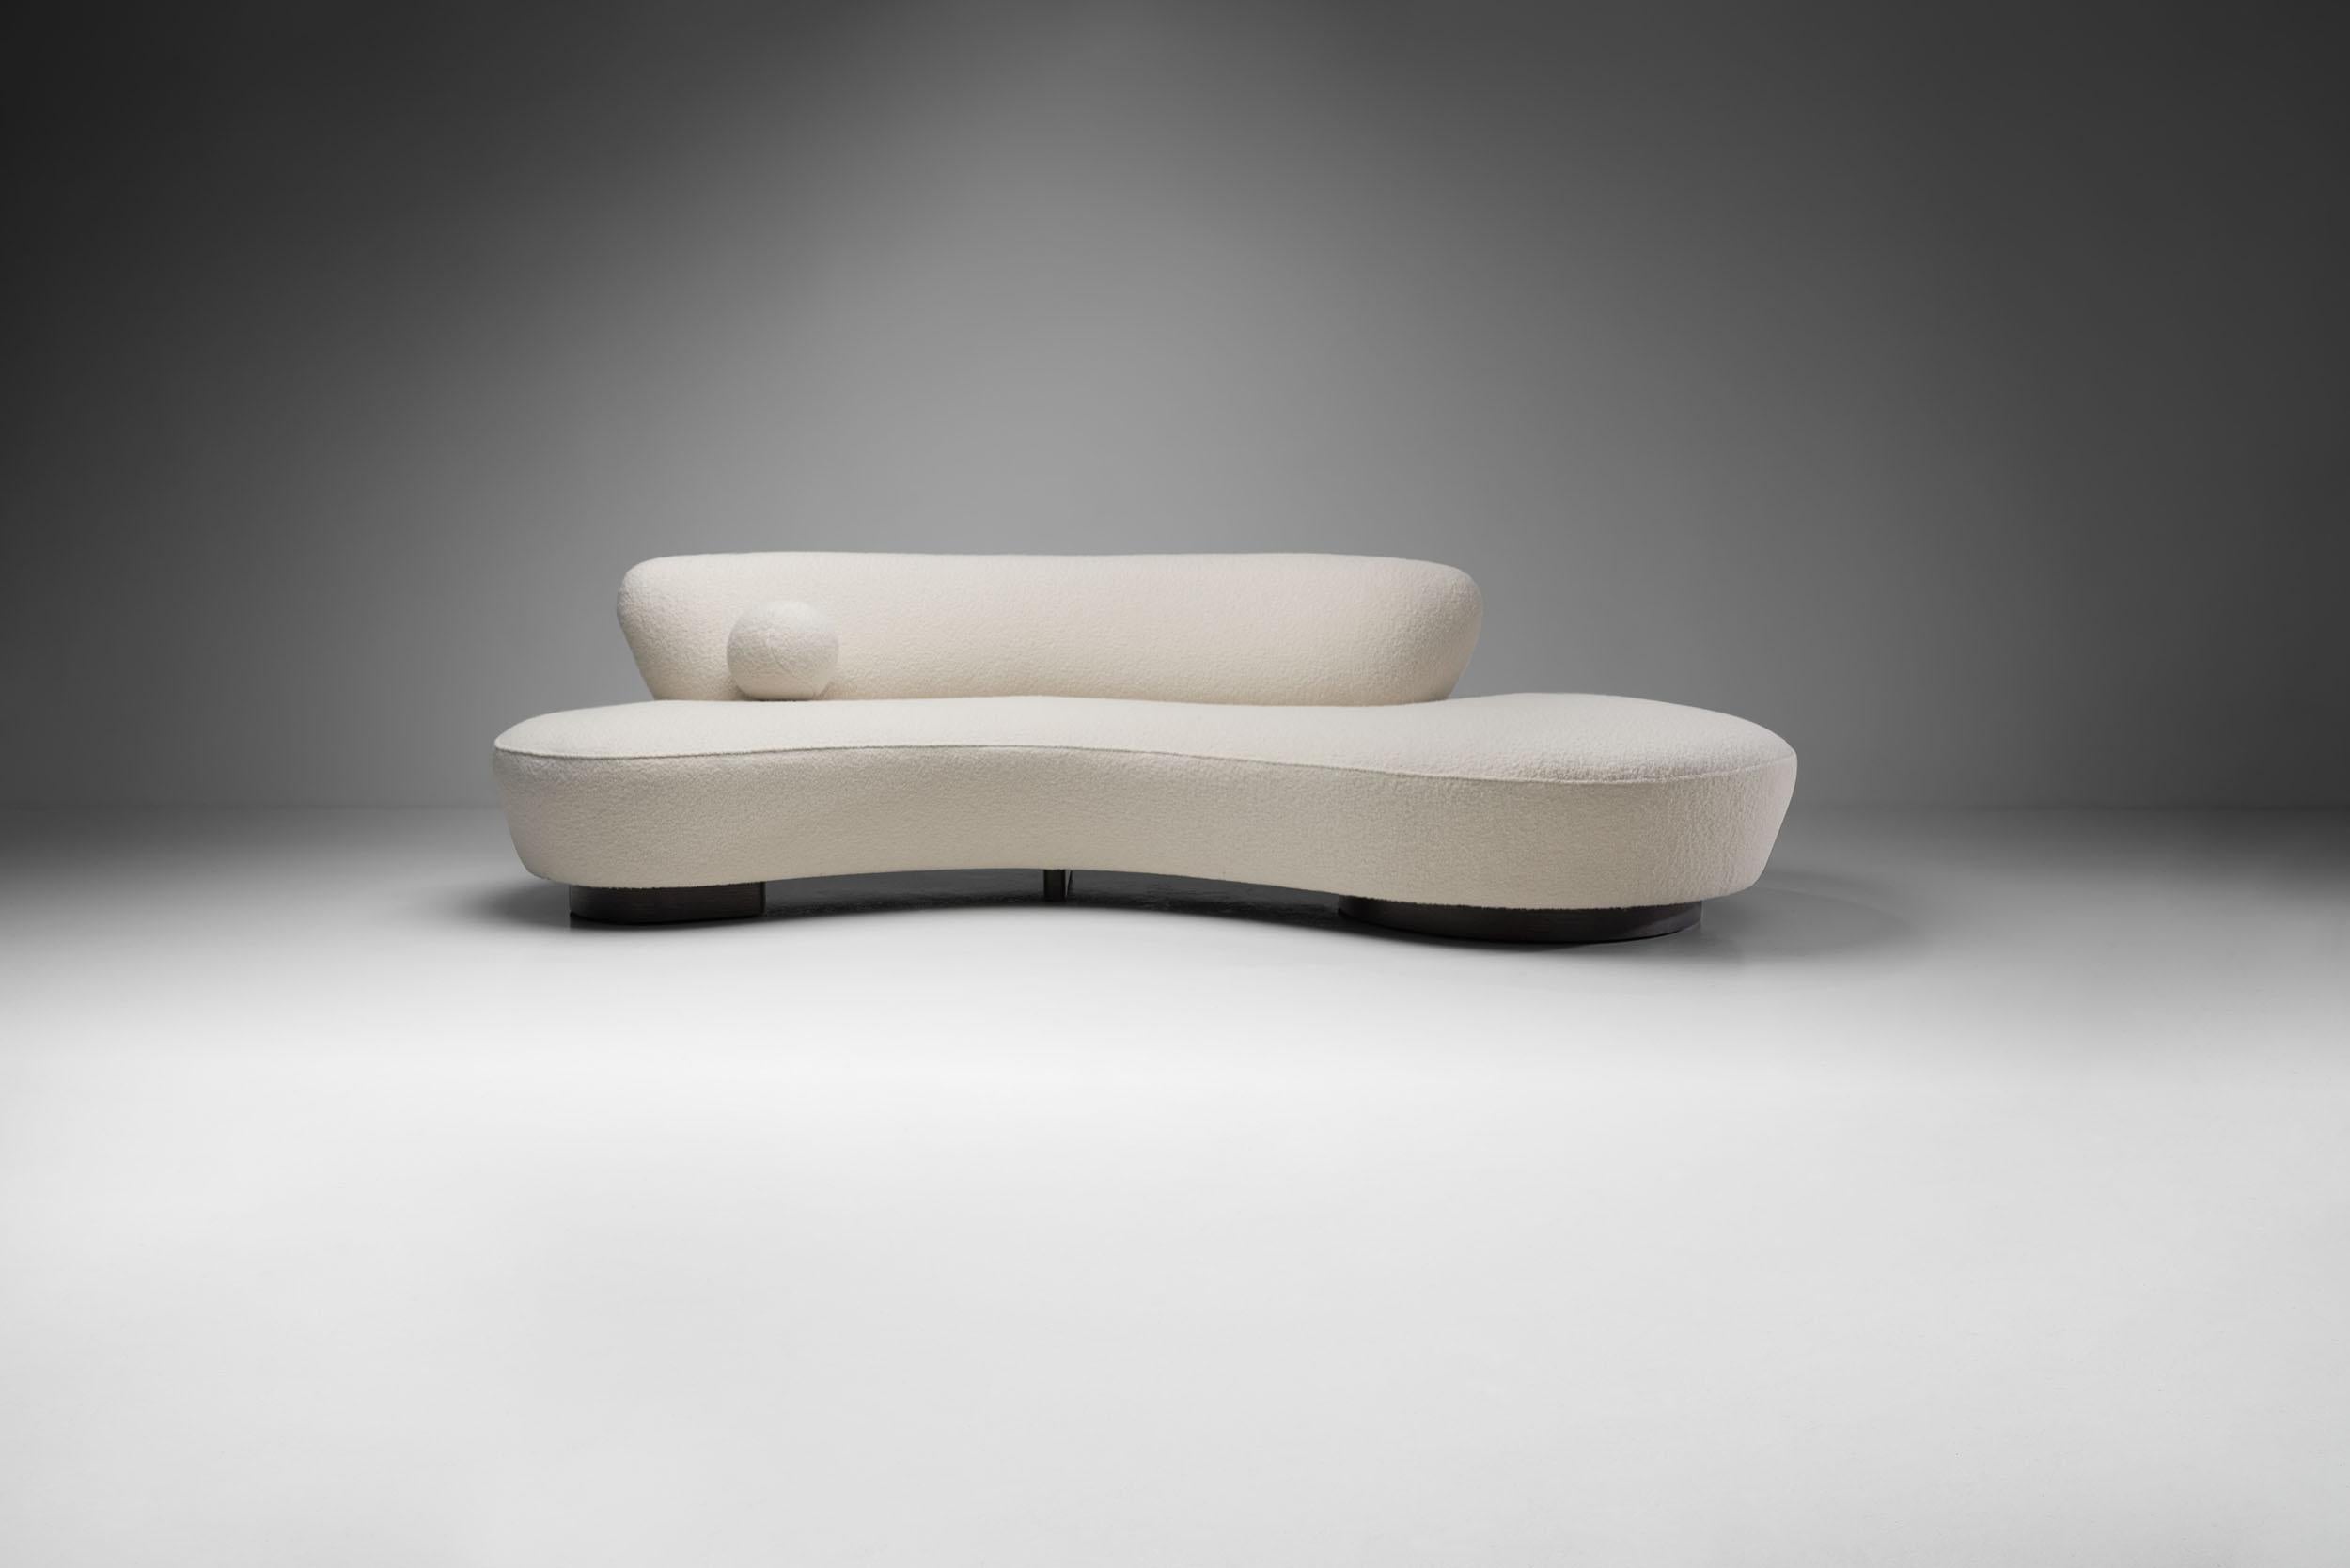 This is a beautiful “Model 150BS” sculptural sofa by the world-famous designer, Vladimir Kagan. This sofa shows Kagan’s skill to fuse sleek design with the trappings of comfort.

With a clean white bouclé fabric upholstery, this Serpentine soda